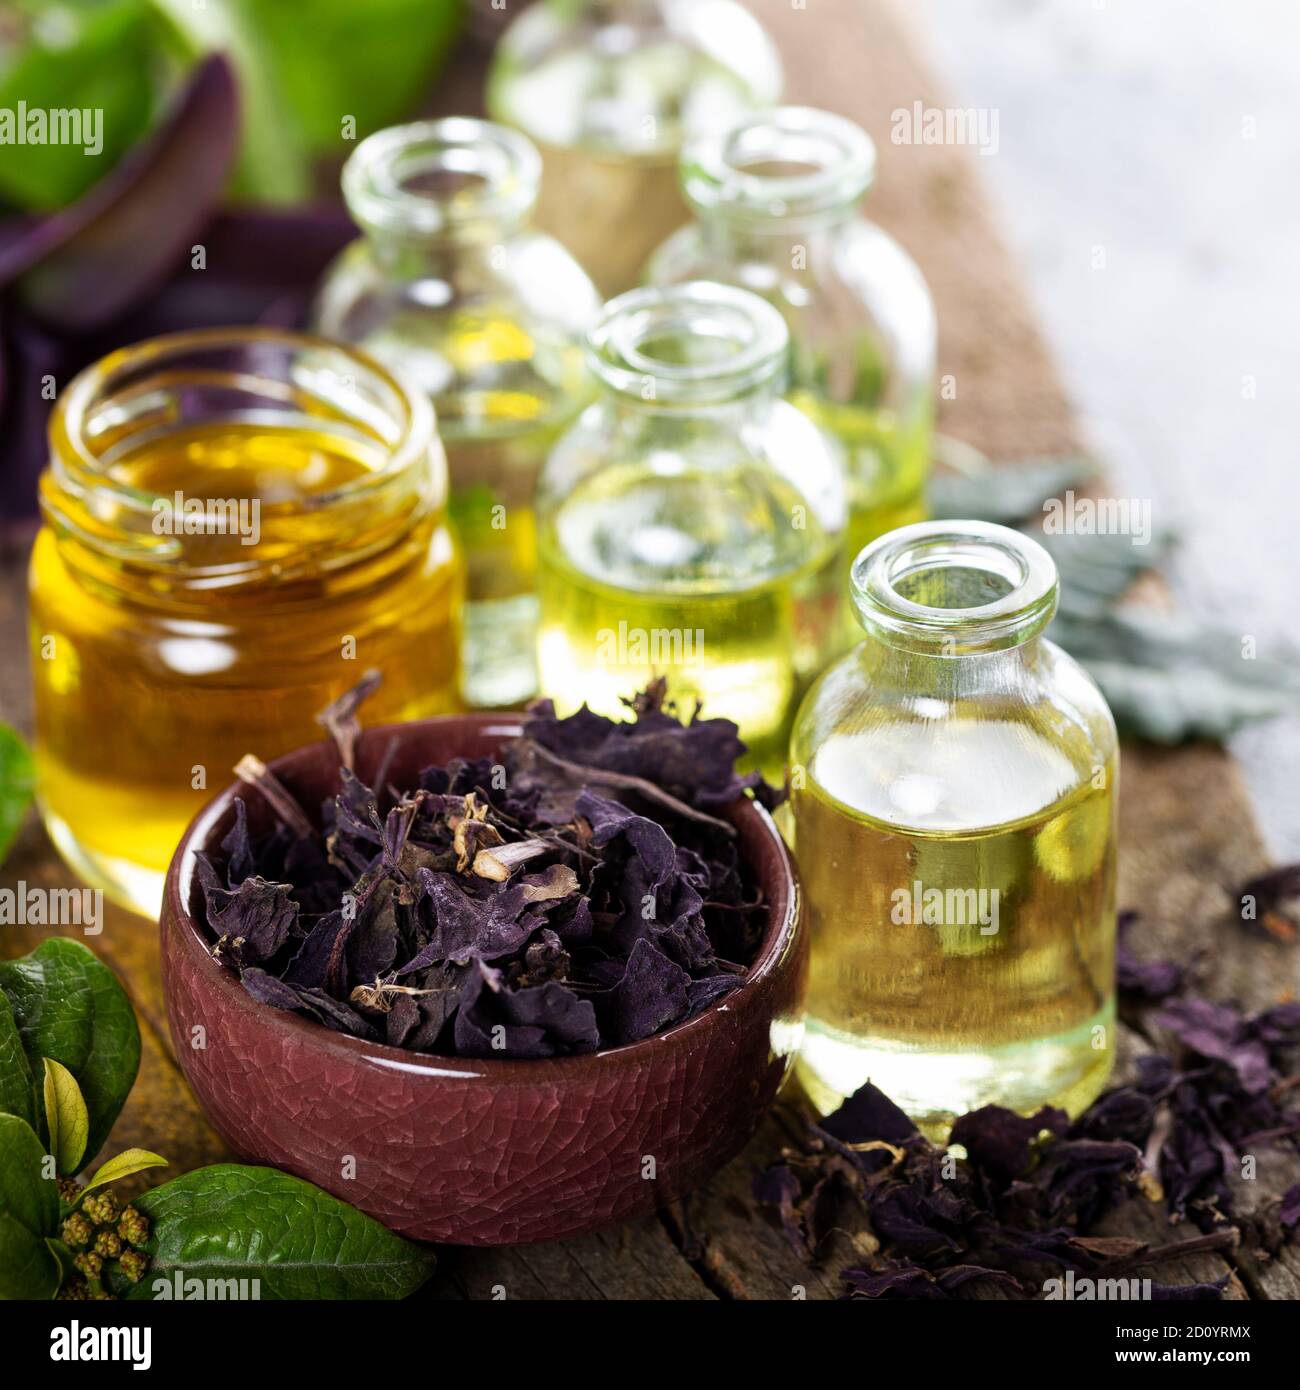 A bottle of basil essential oil with dried basil leaves and flowers. Selection of essential oils, with herbs and flowers in the background. Stock Photo